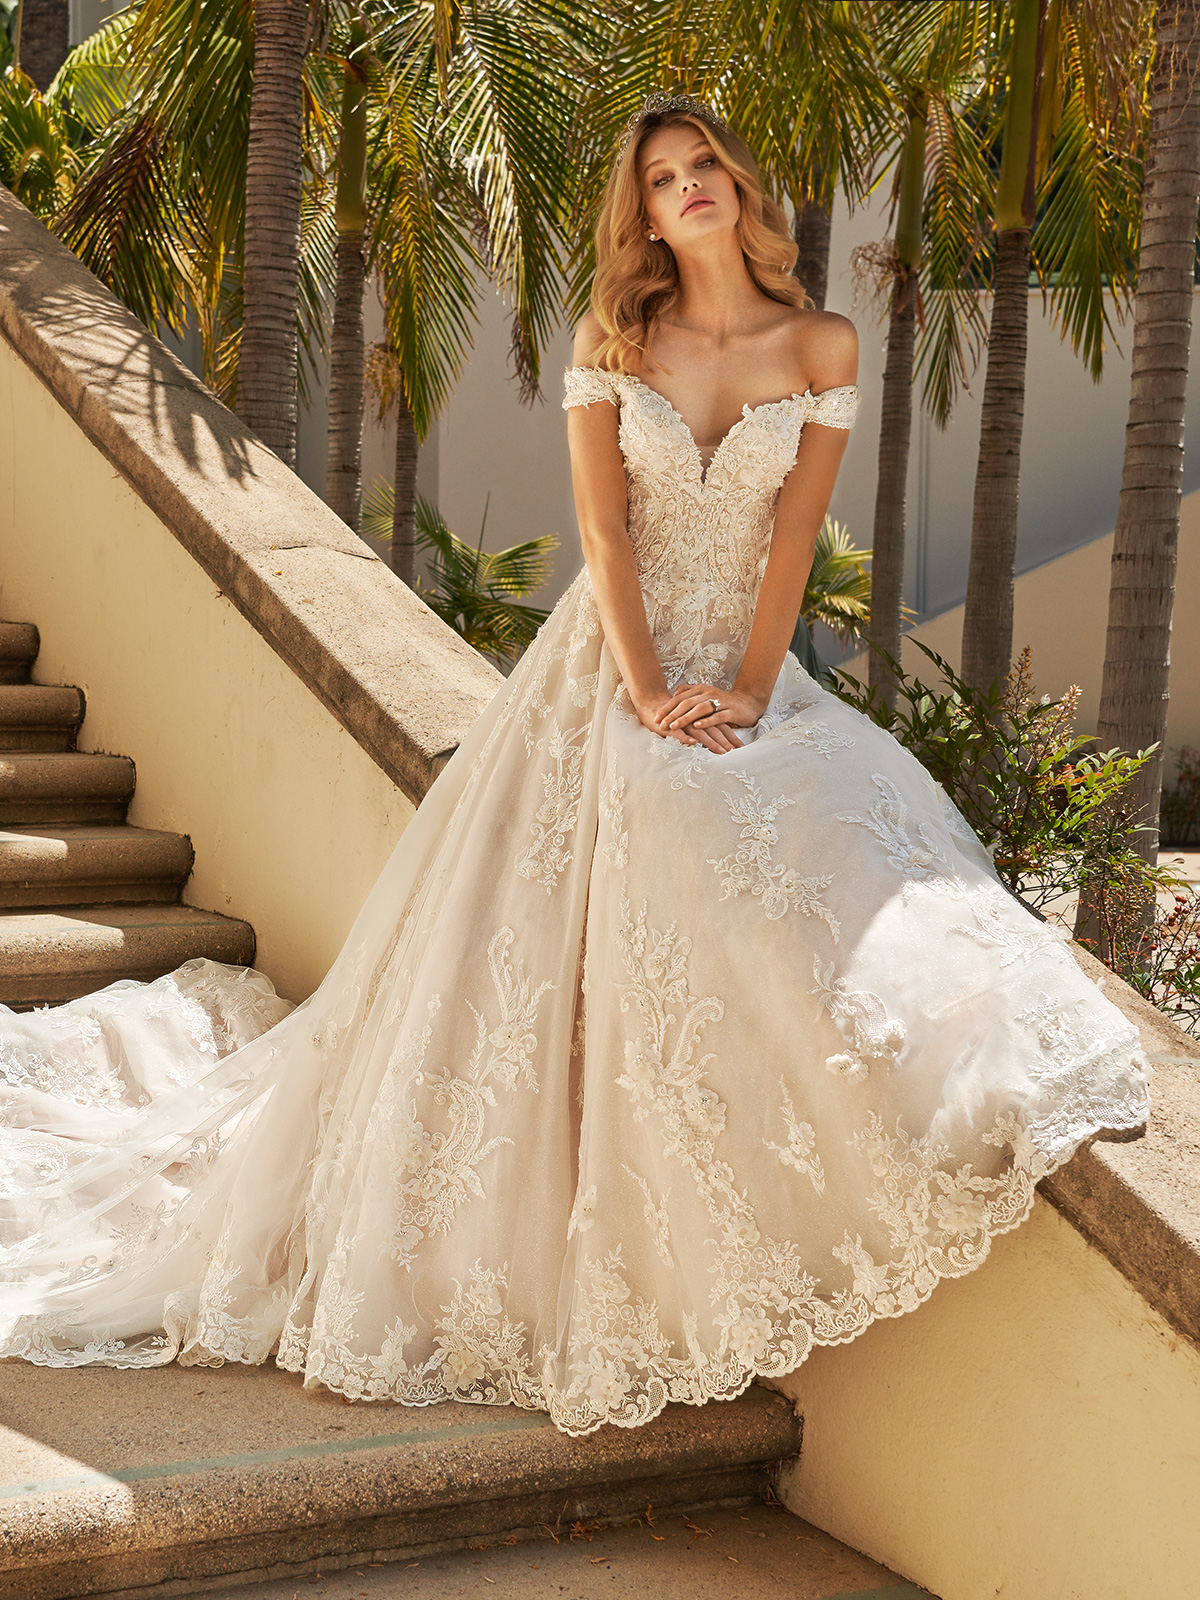 Find the Best Wedding Dress Style for your Figure